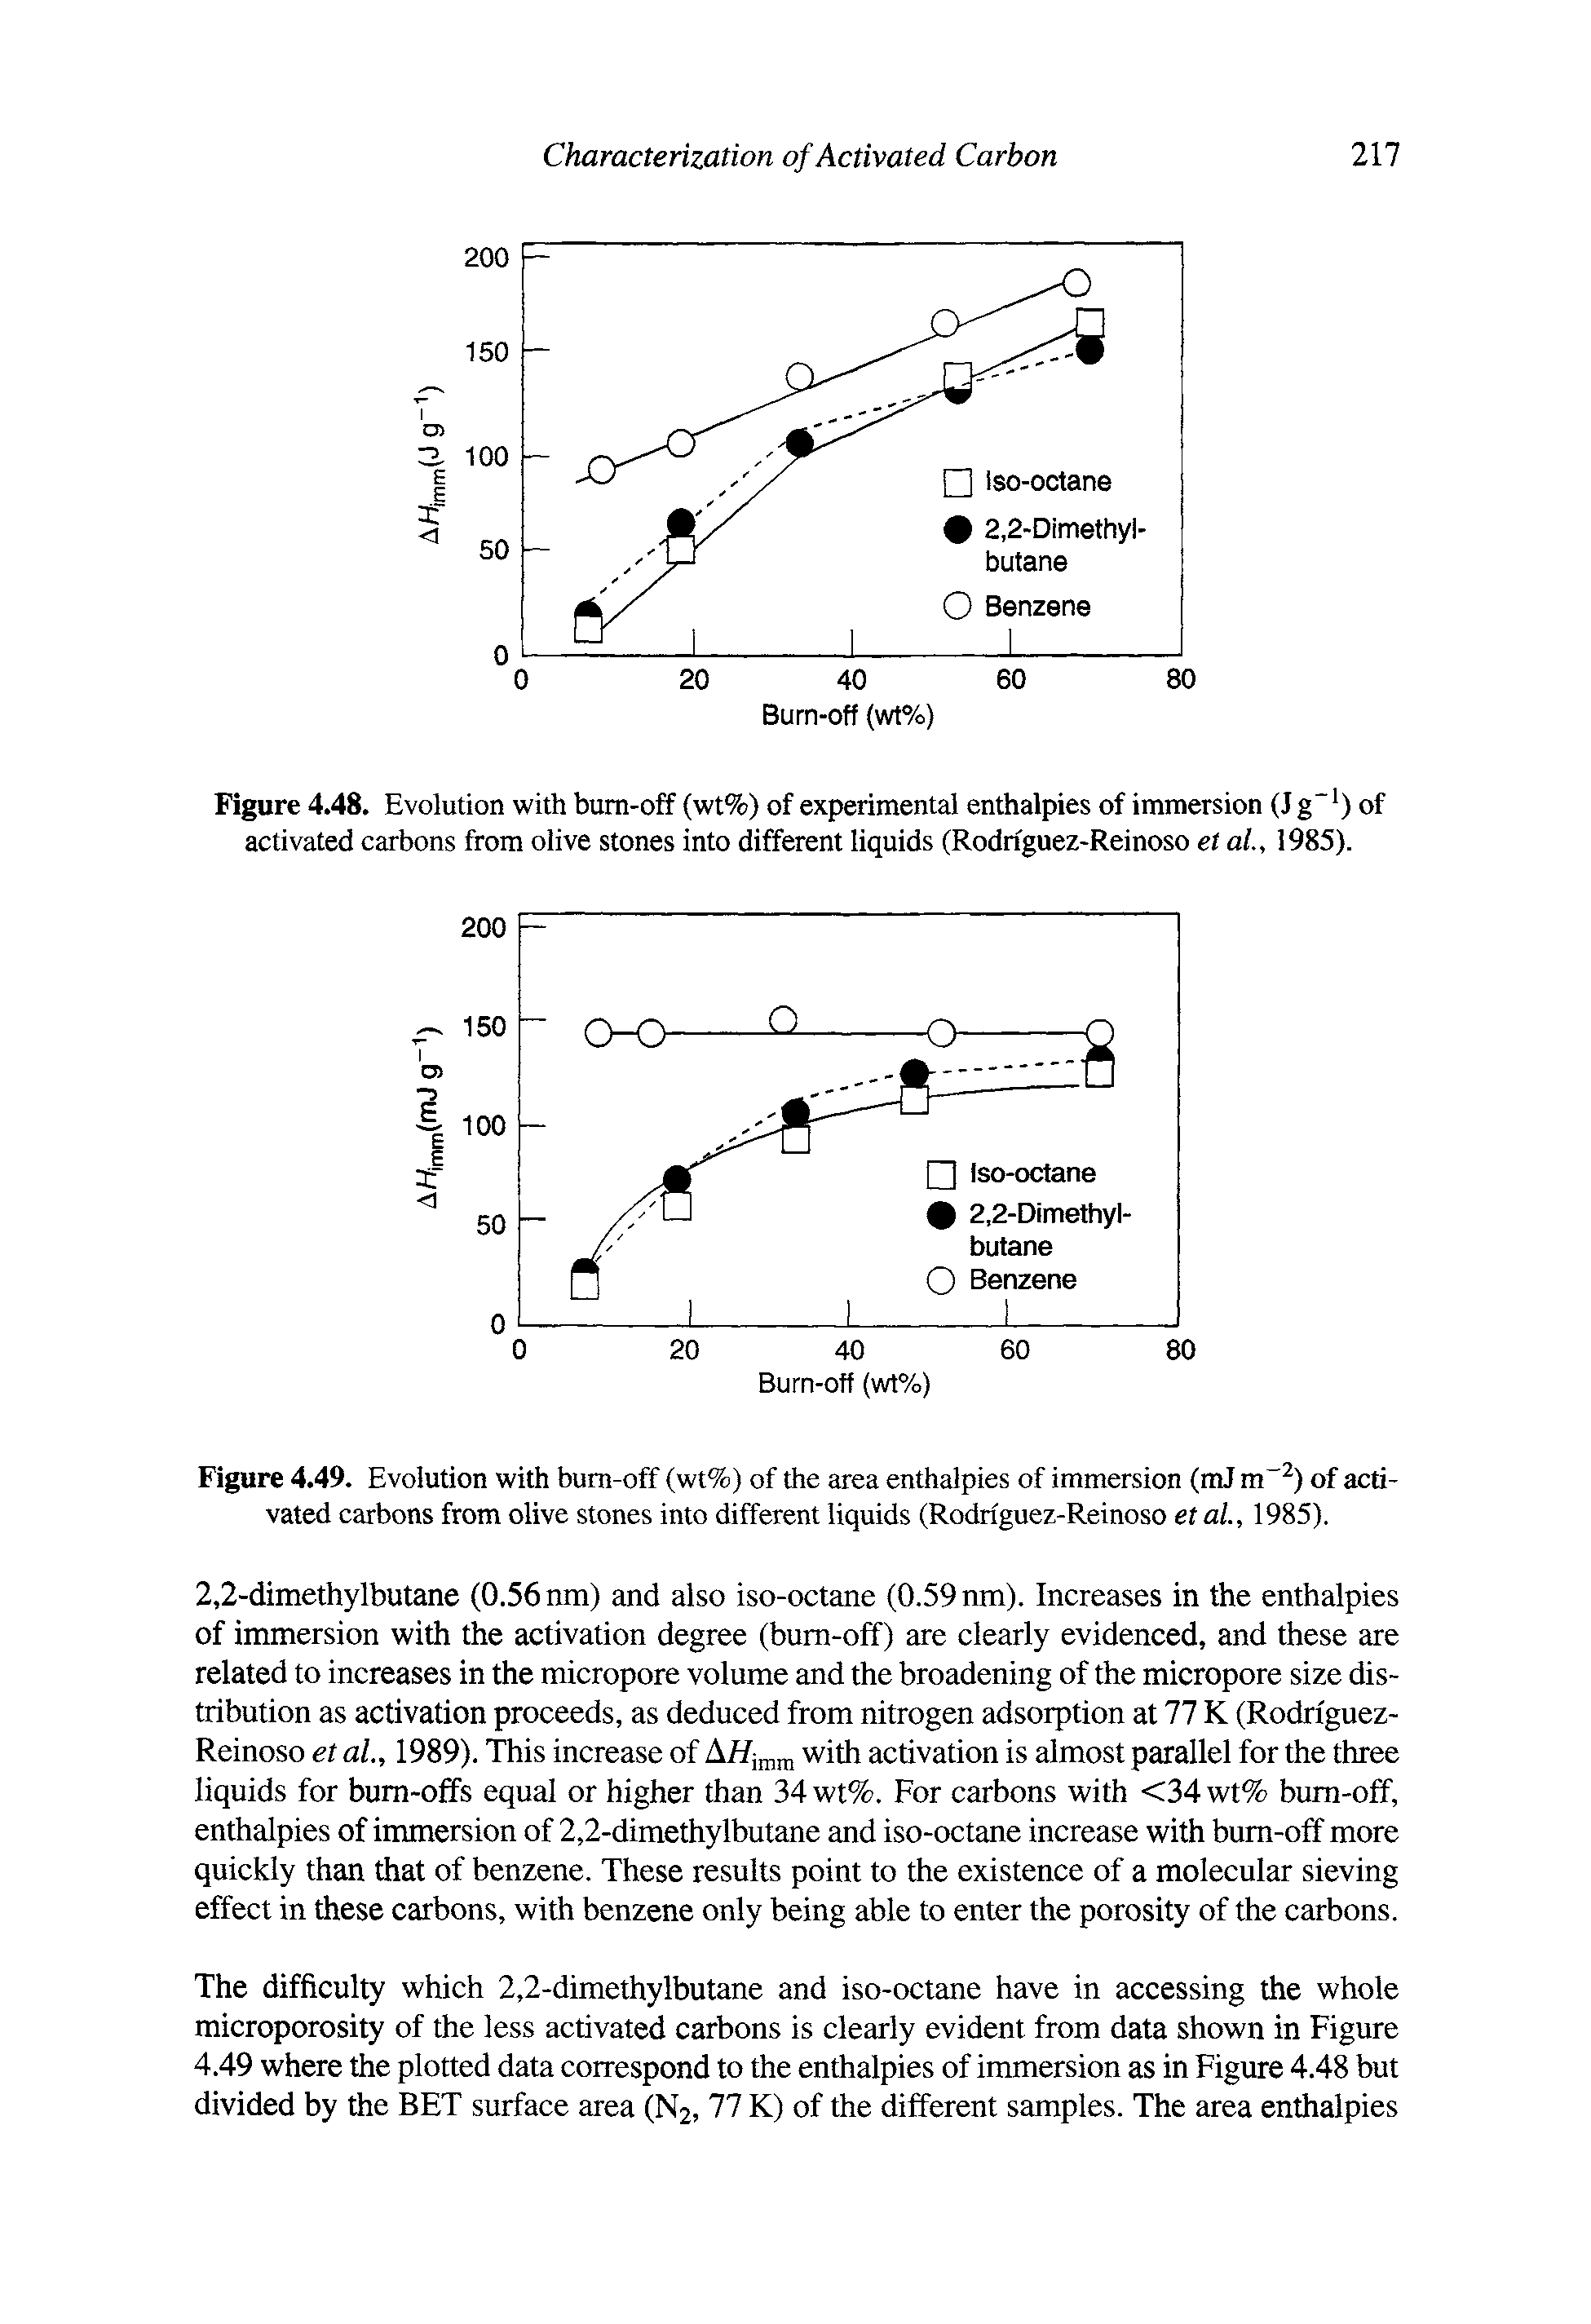 Figure 4.49. Evolution with bum-off (wt%) of the area enthalpies of immersion (mJ m ) of activated carbons from olive stones into different liquids (Rodrfguez-Reinoso etai, 1985).